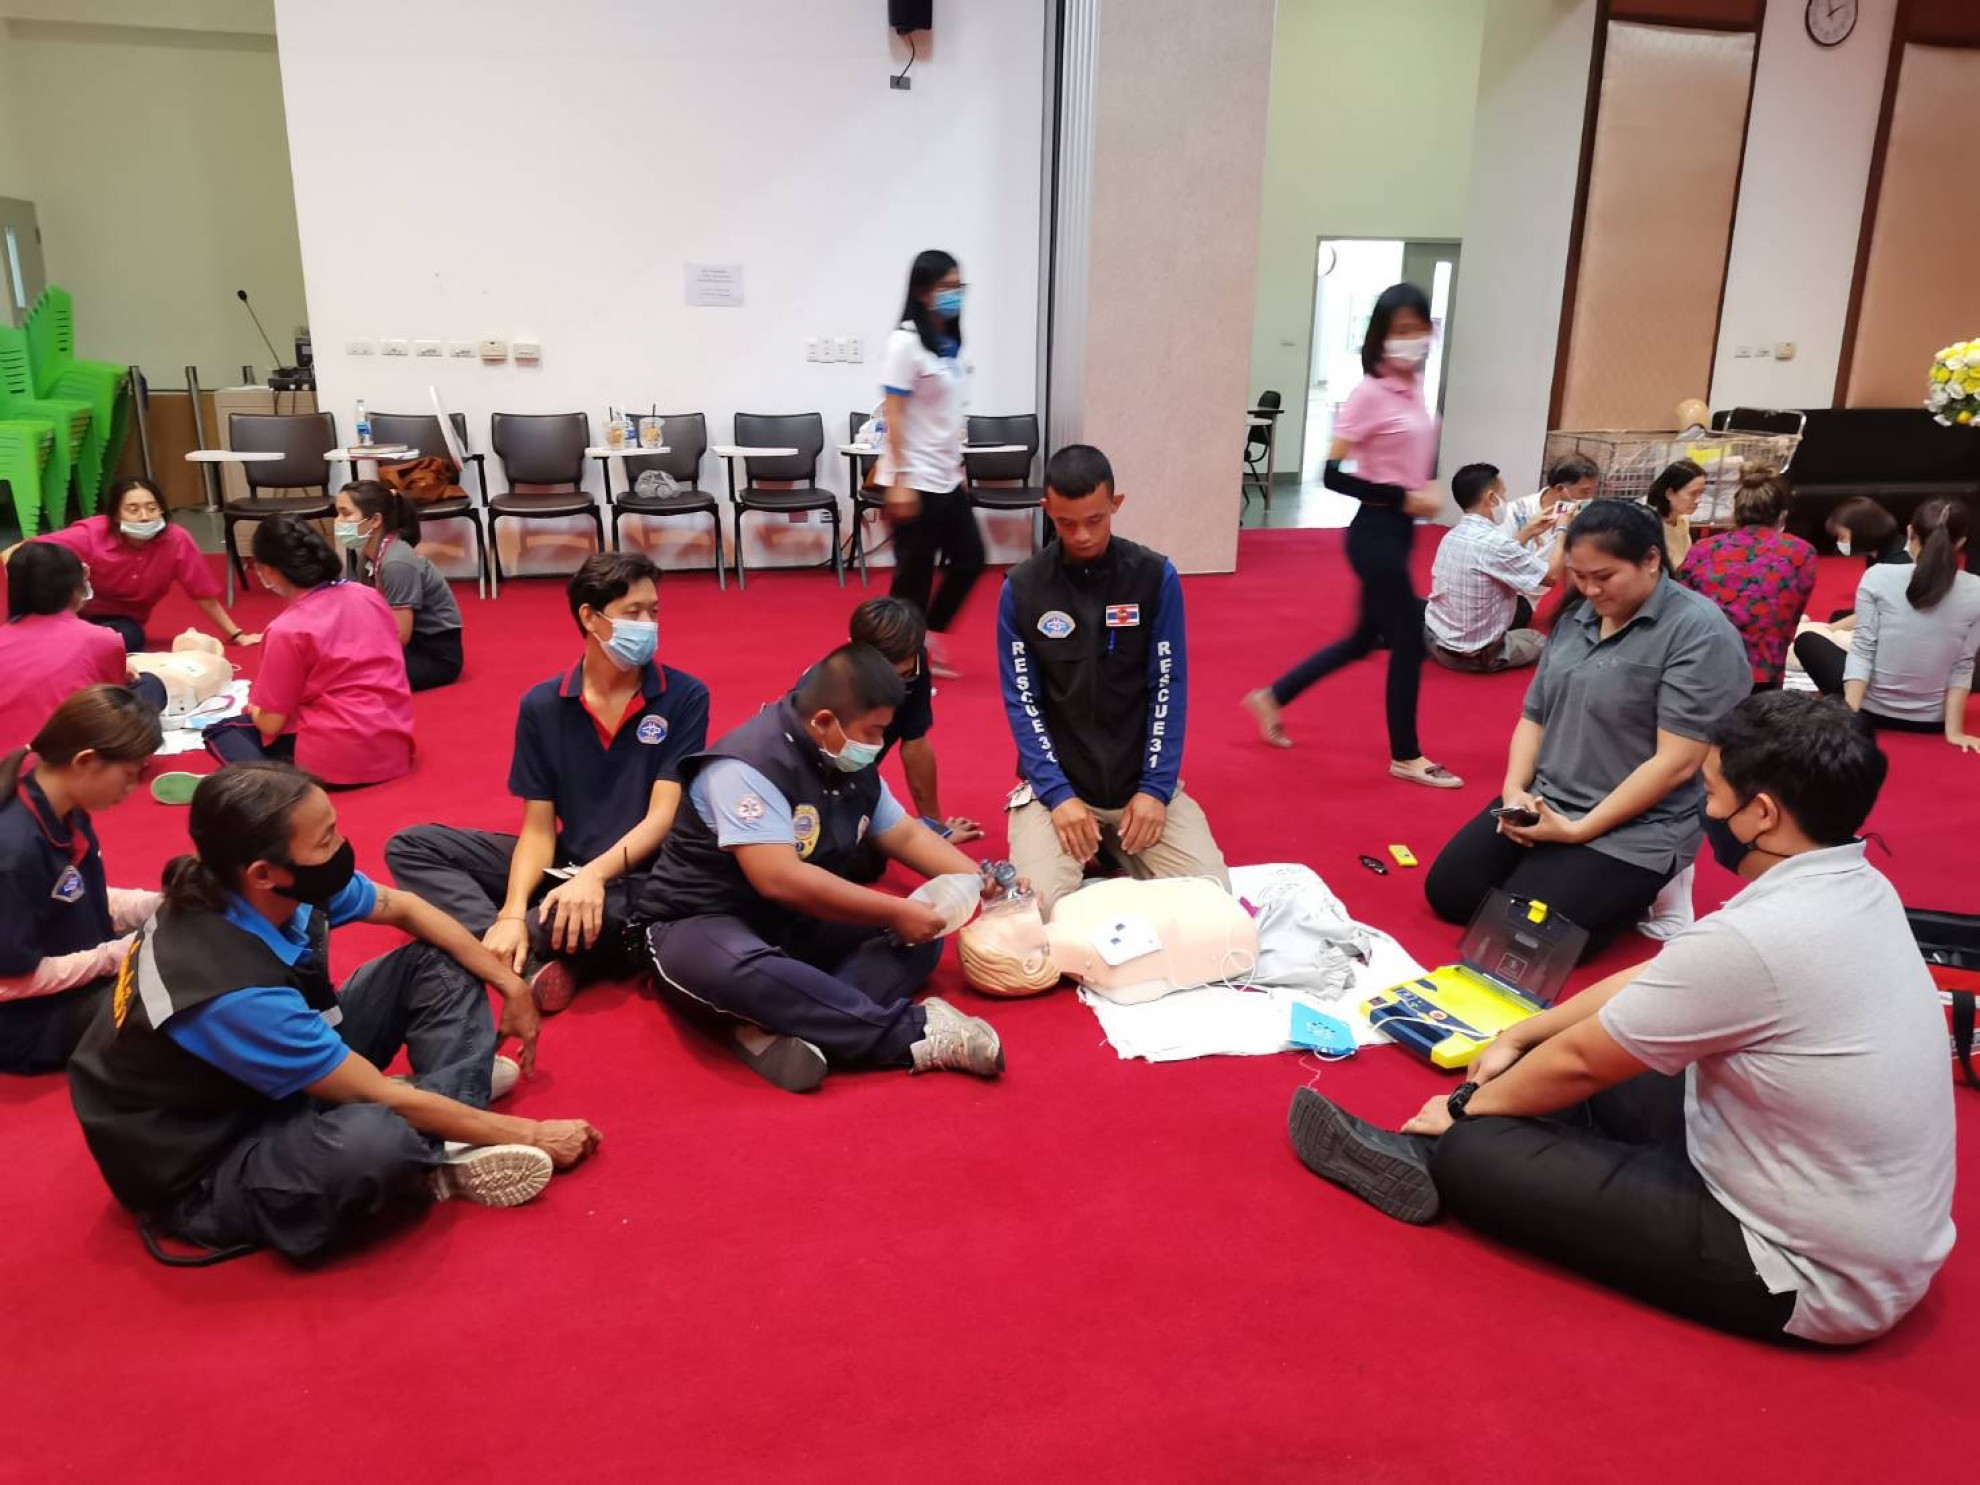 Rescue volunteers demonstrate CPR and airway management